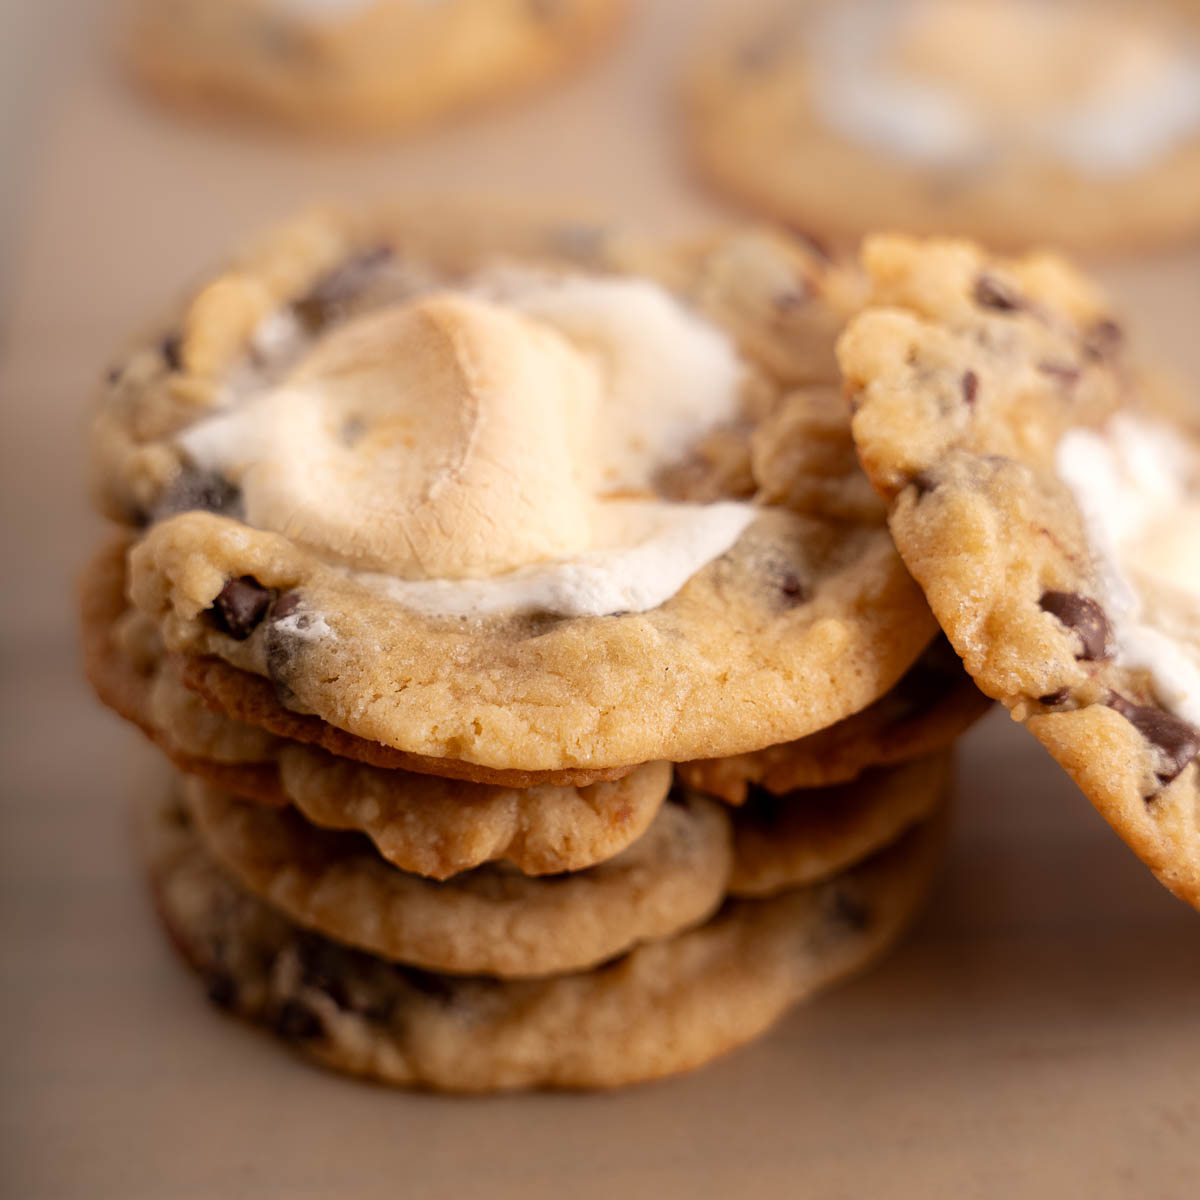 Stacked Chocolate Chip and Marshmallow Cookies at a 45 degree angle 